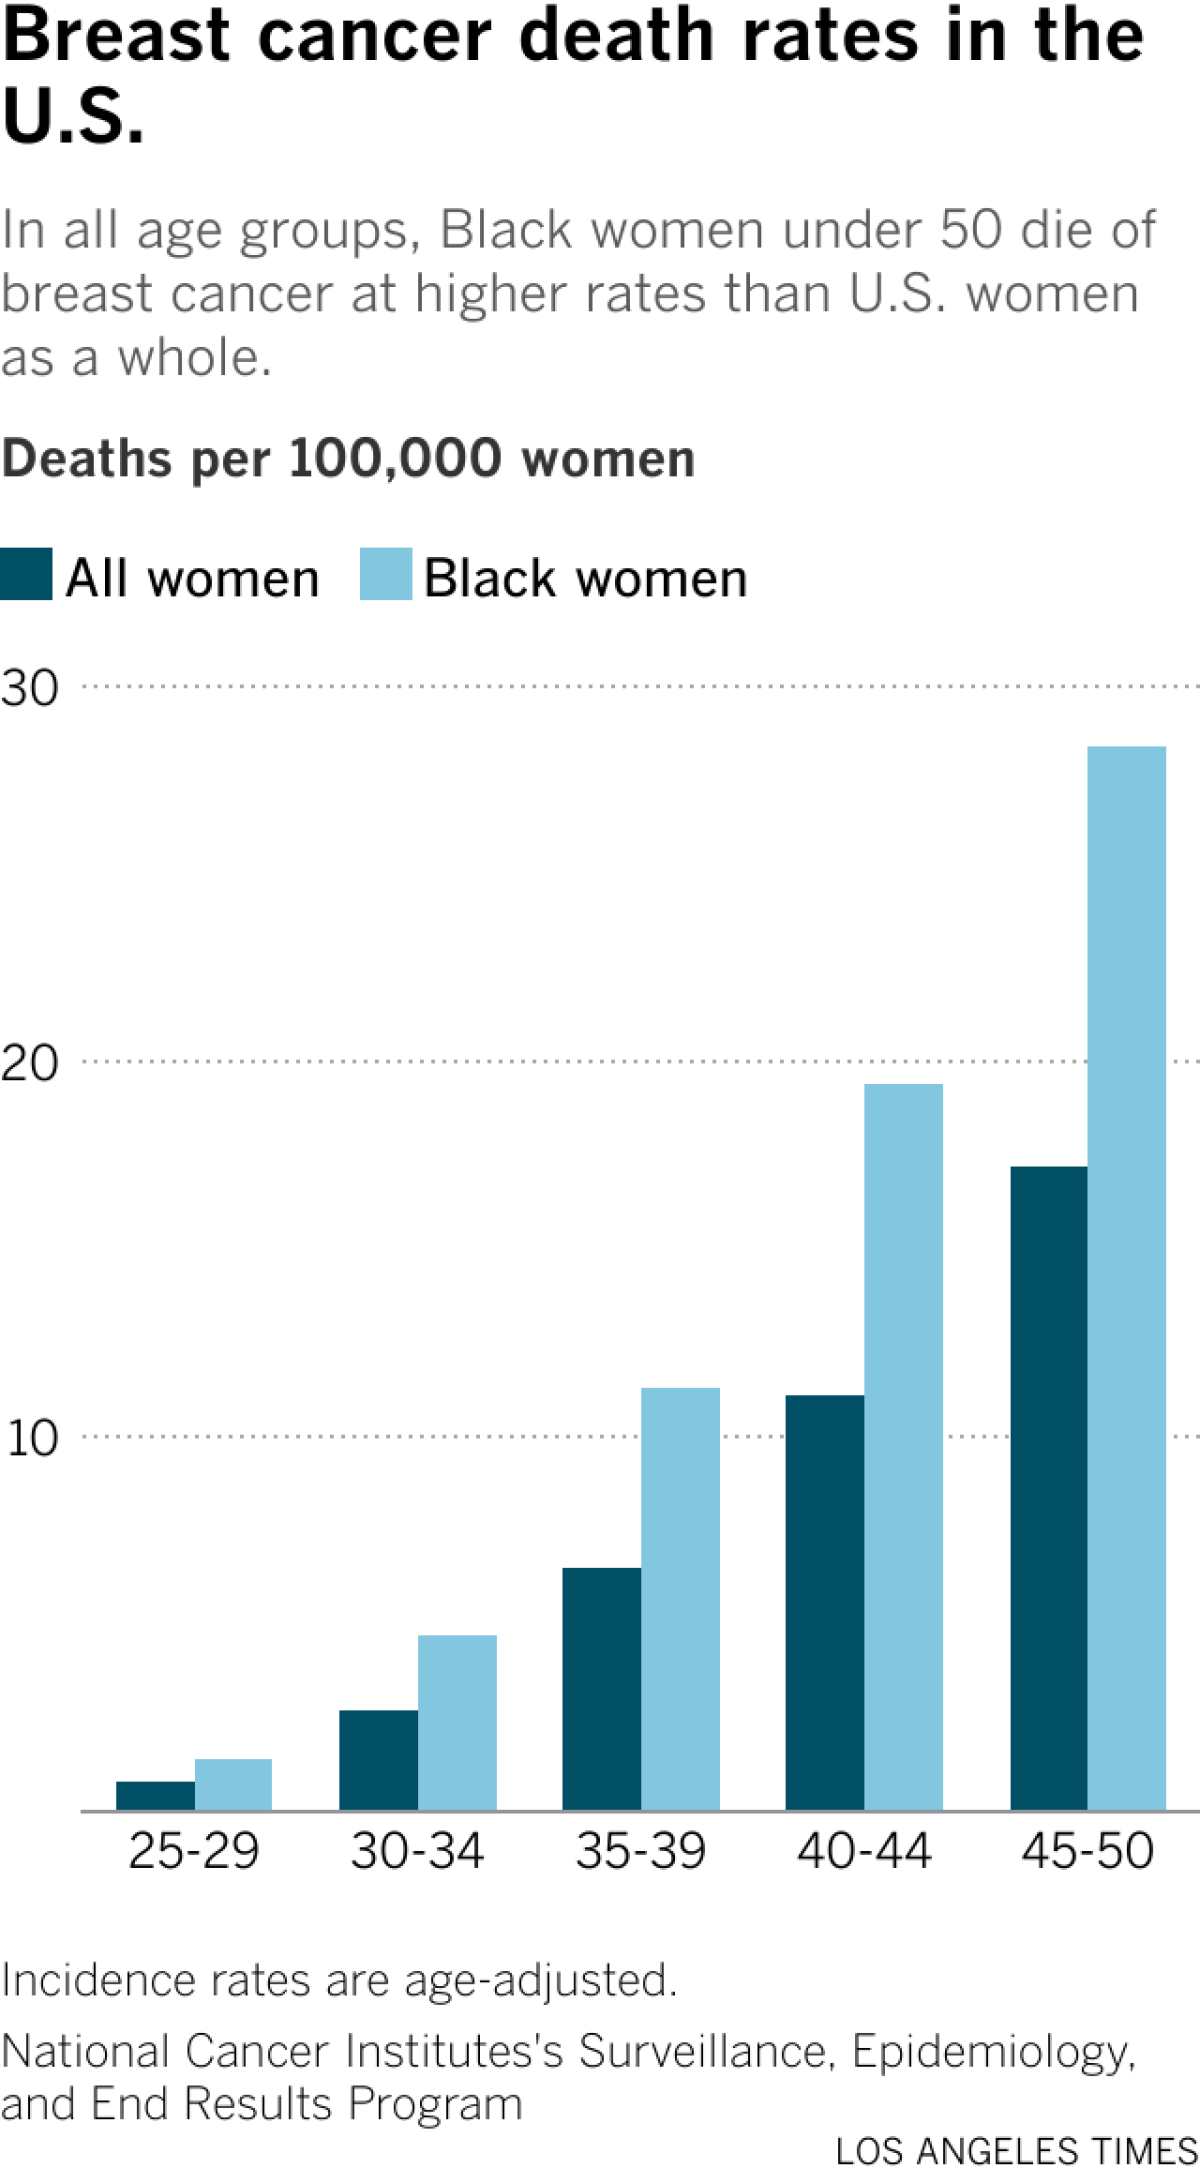 A bar chart compares incidence rates of cancer among Black women and all women in the U.S. by five-year age category, from ages 25-29 to 45-50. In all categories, Black women have higher rates of death. The gap gets larger with age.